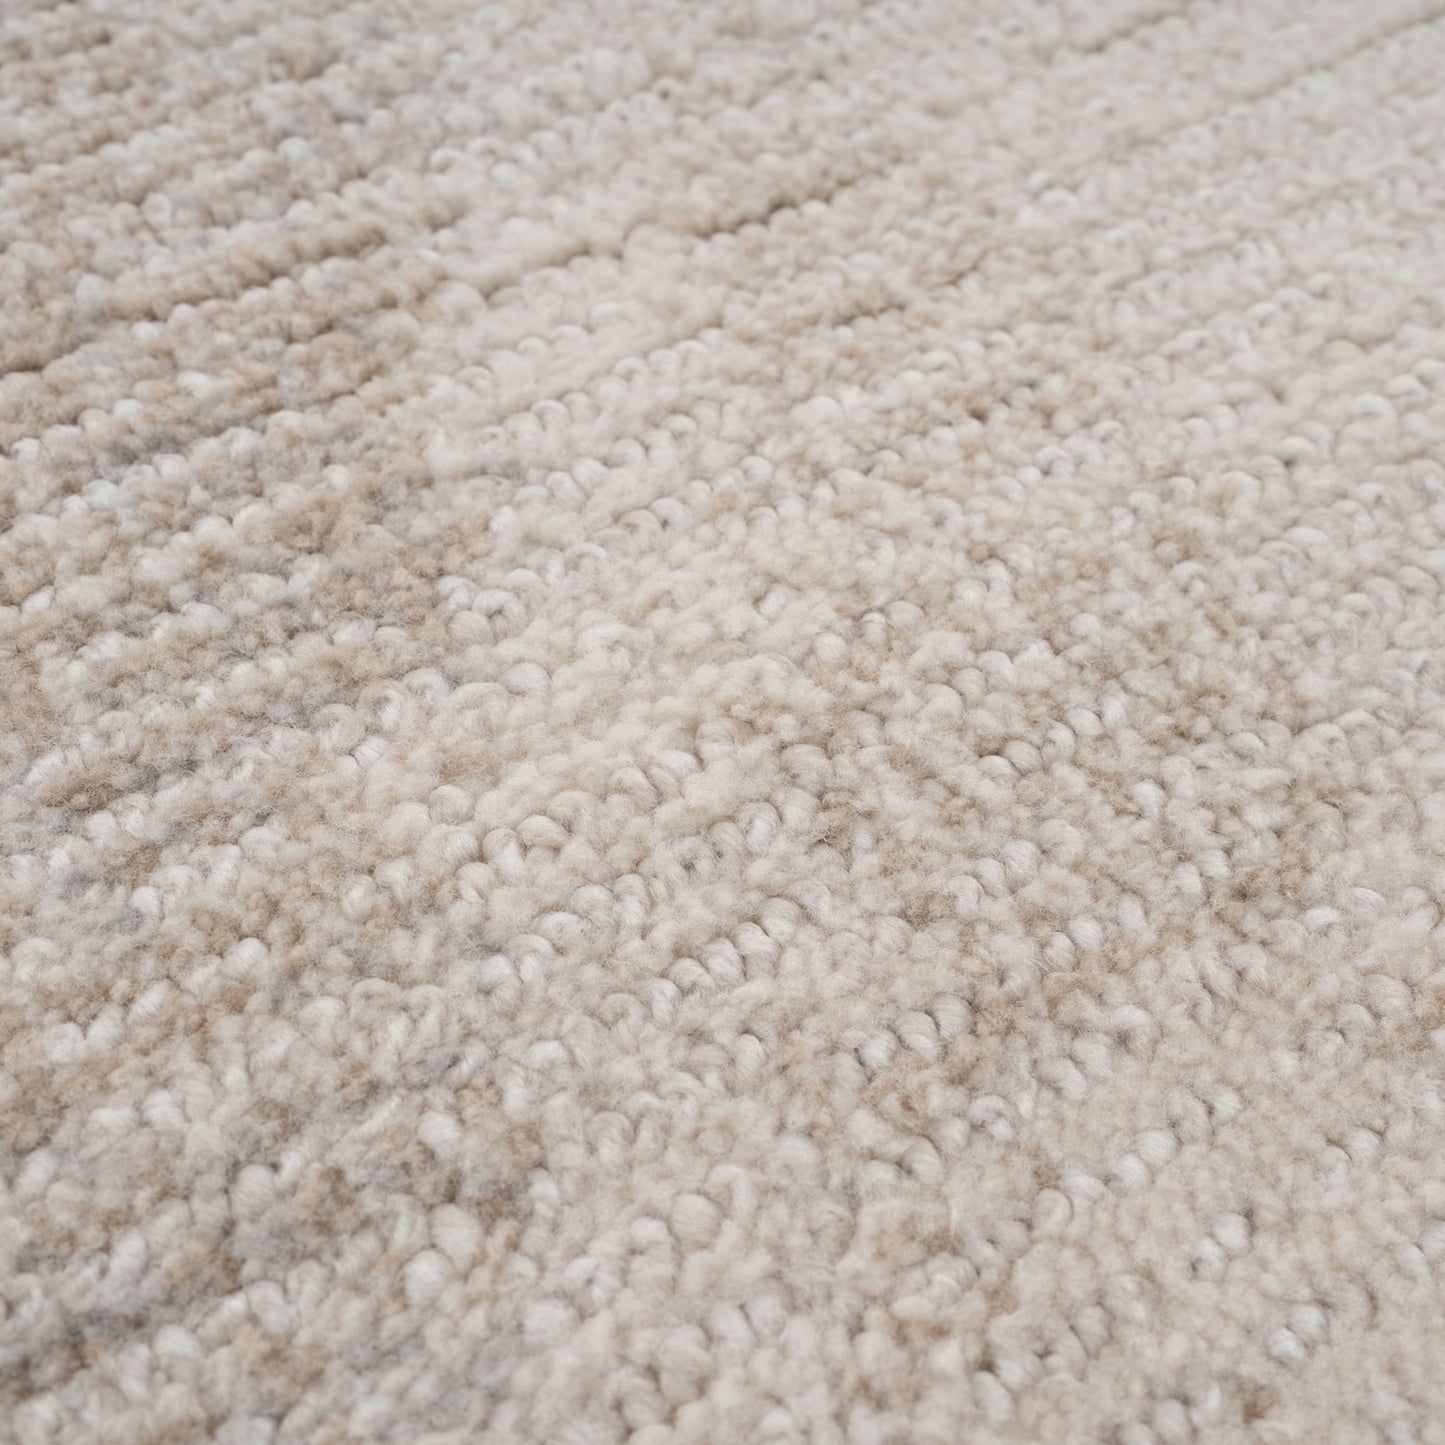 Neutral Lines Area Rug - Ines